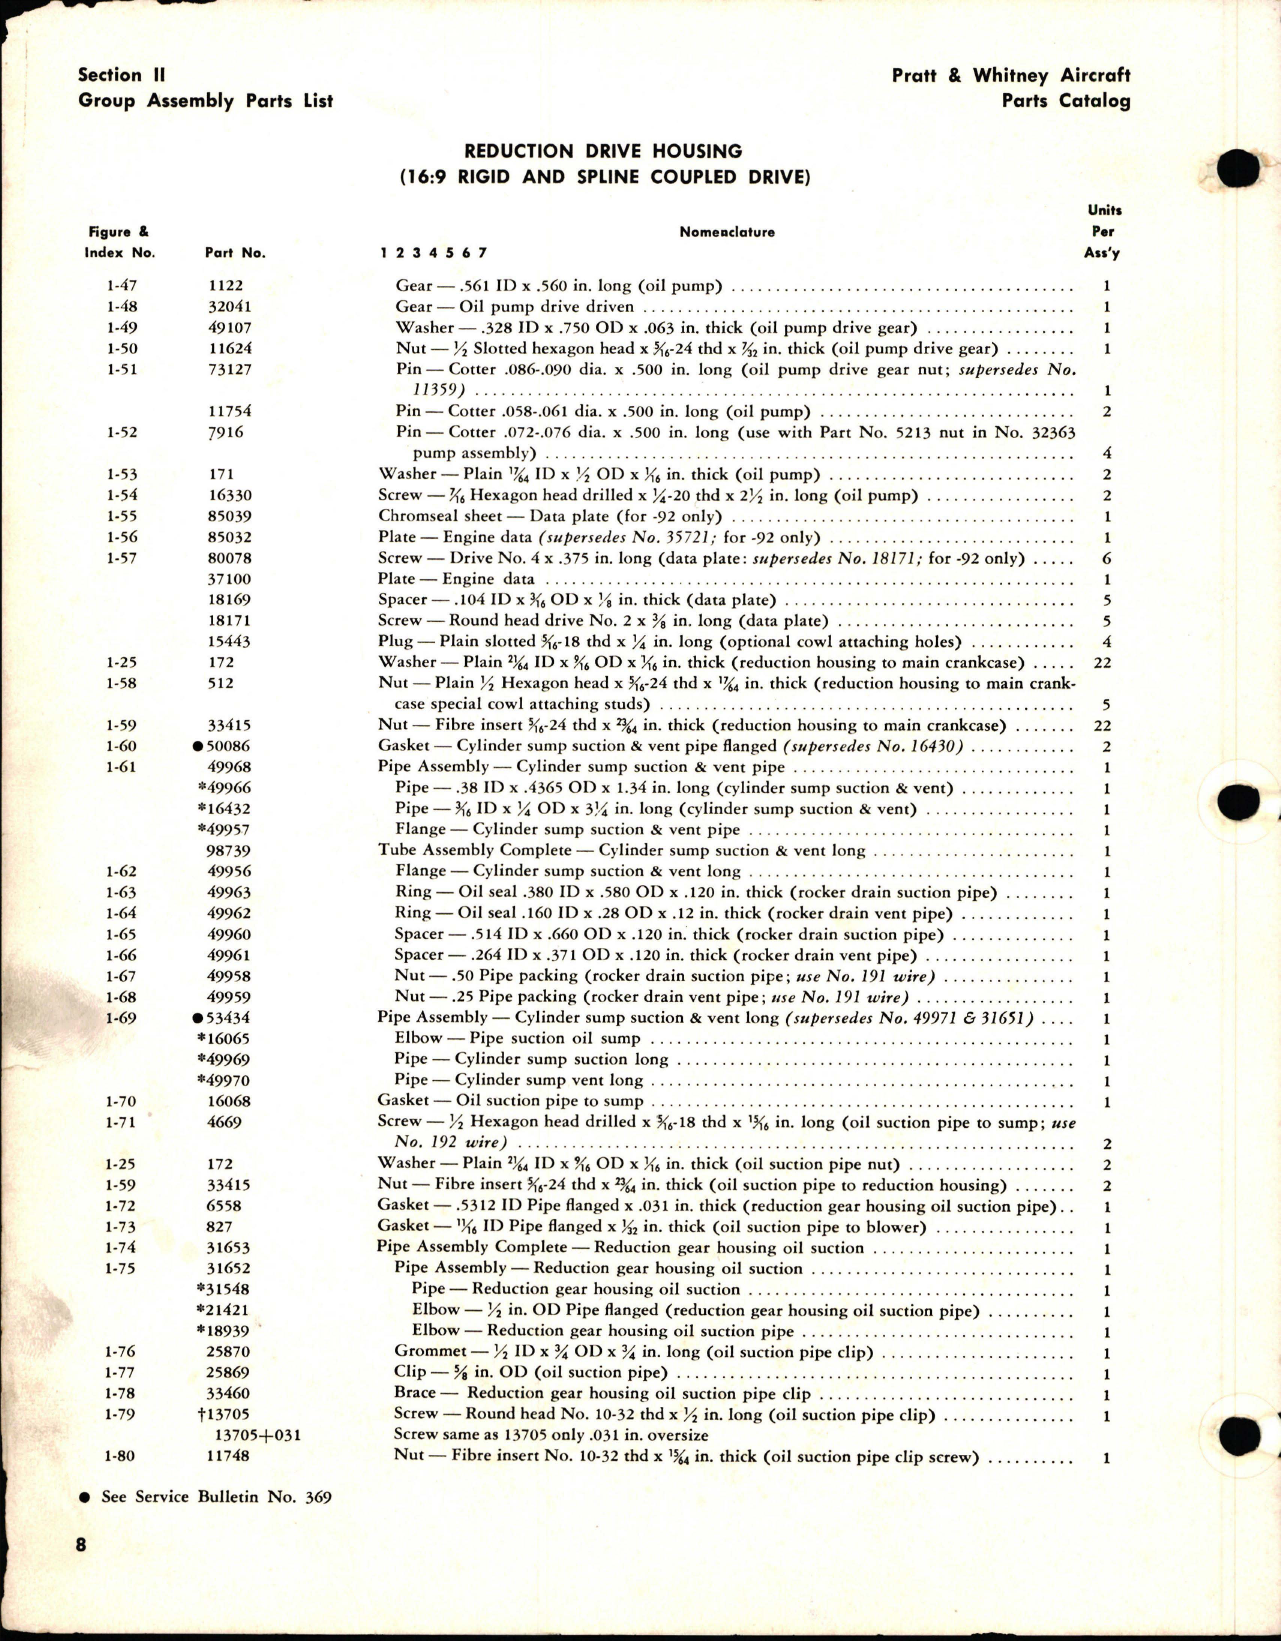 Sample page 9 from AirCorps Library document: Parts Catalog for Twin Wasp Model R-1830-C3G & -92 Pratt & Whitney Engines